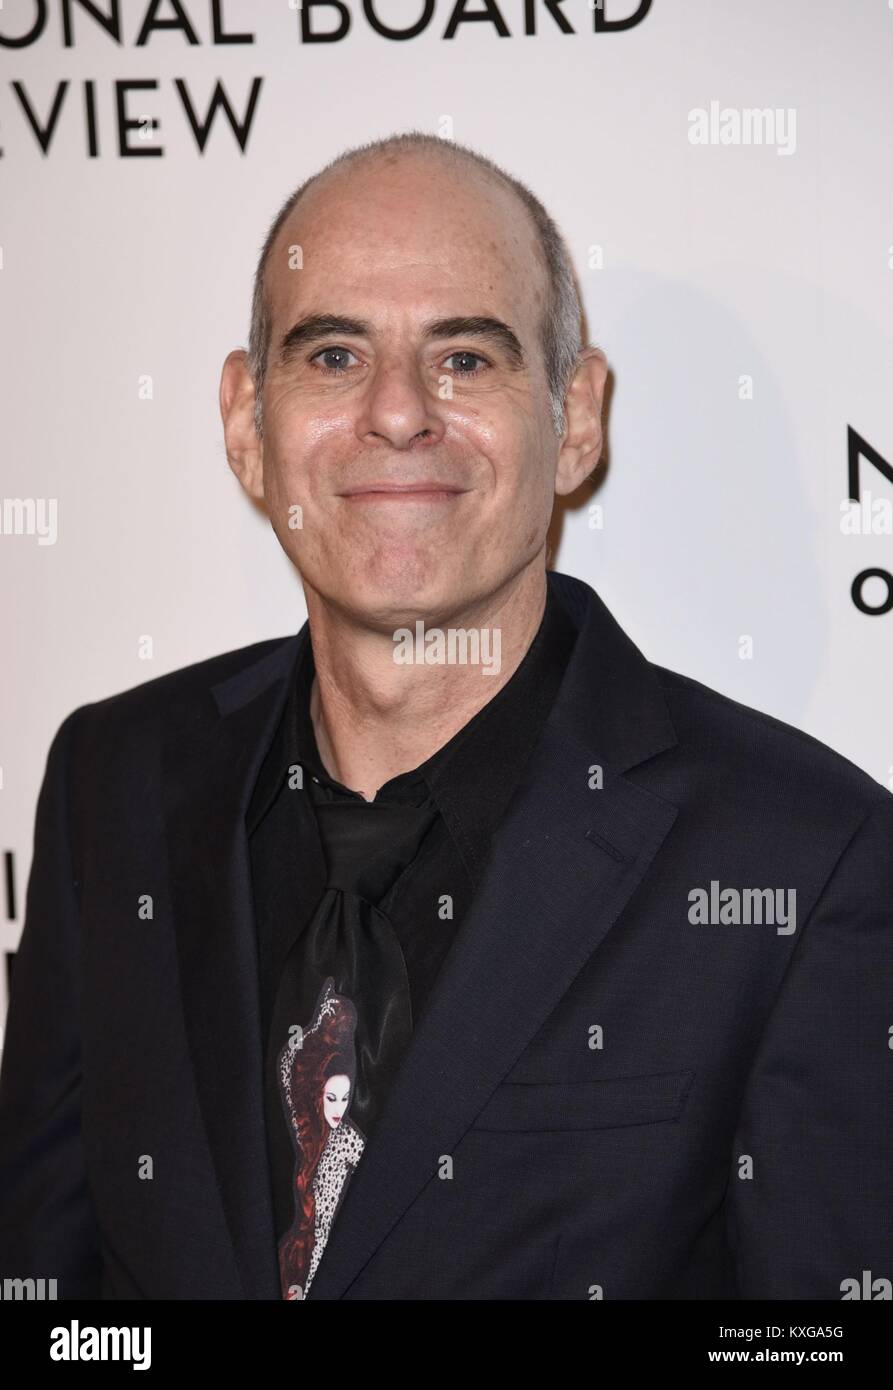 New York, NY, USA. 9th Jan, 2018. Samuel Maoz at arrivals for The National Board of Review Awards 2018, Cipriani 42nd Street, New York, NY January 9, 2018. Credit: Derek Storm/Everett Collection/Alamy Live News Stock Photo